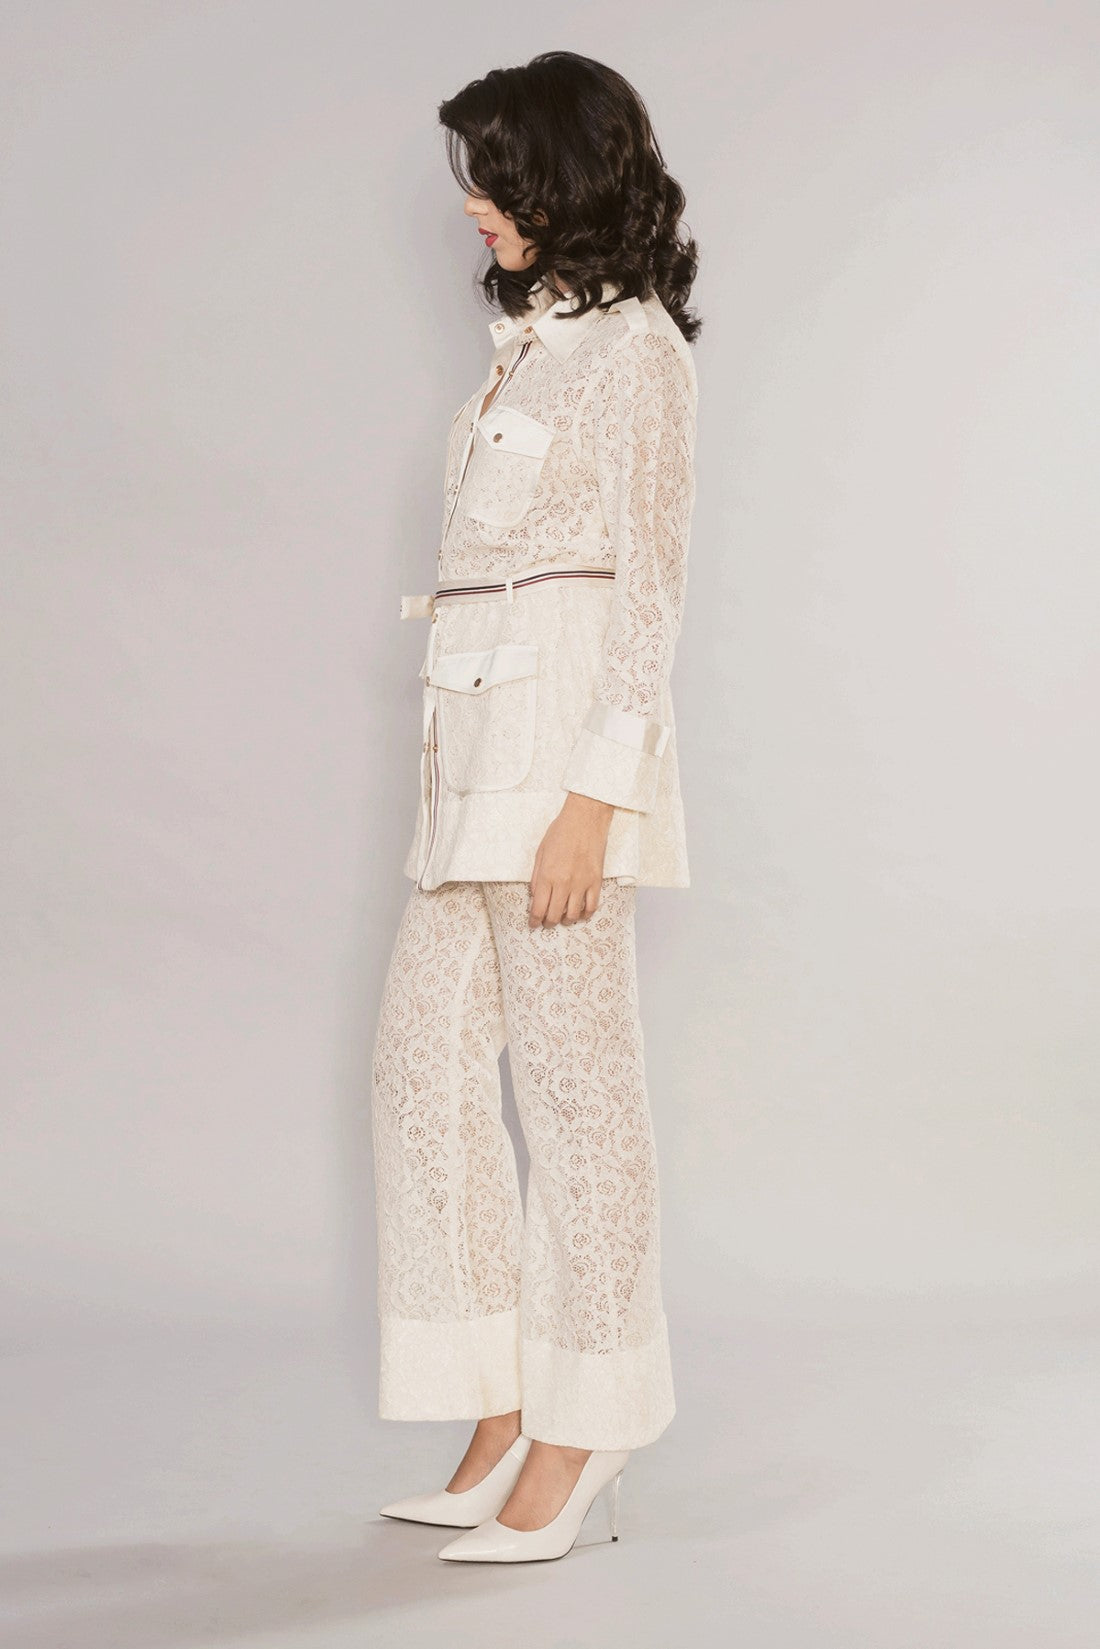 Mehca - High Waisted Lace Flared Pant in White | Showpo USA